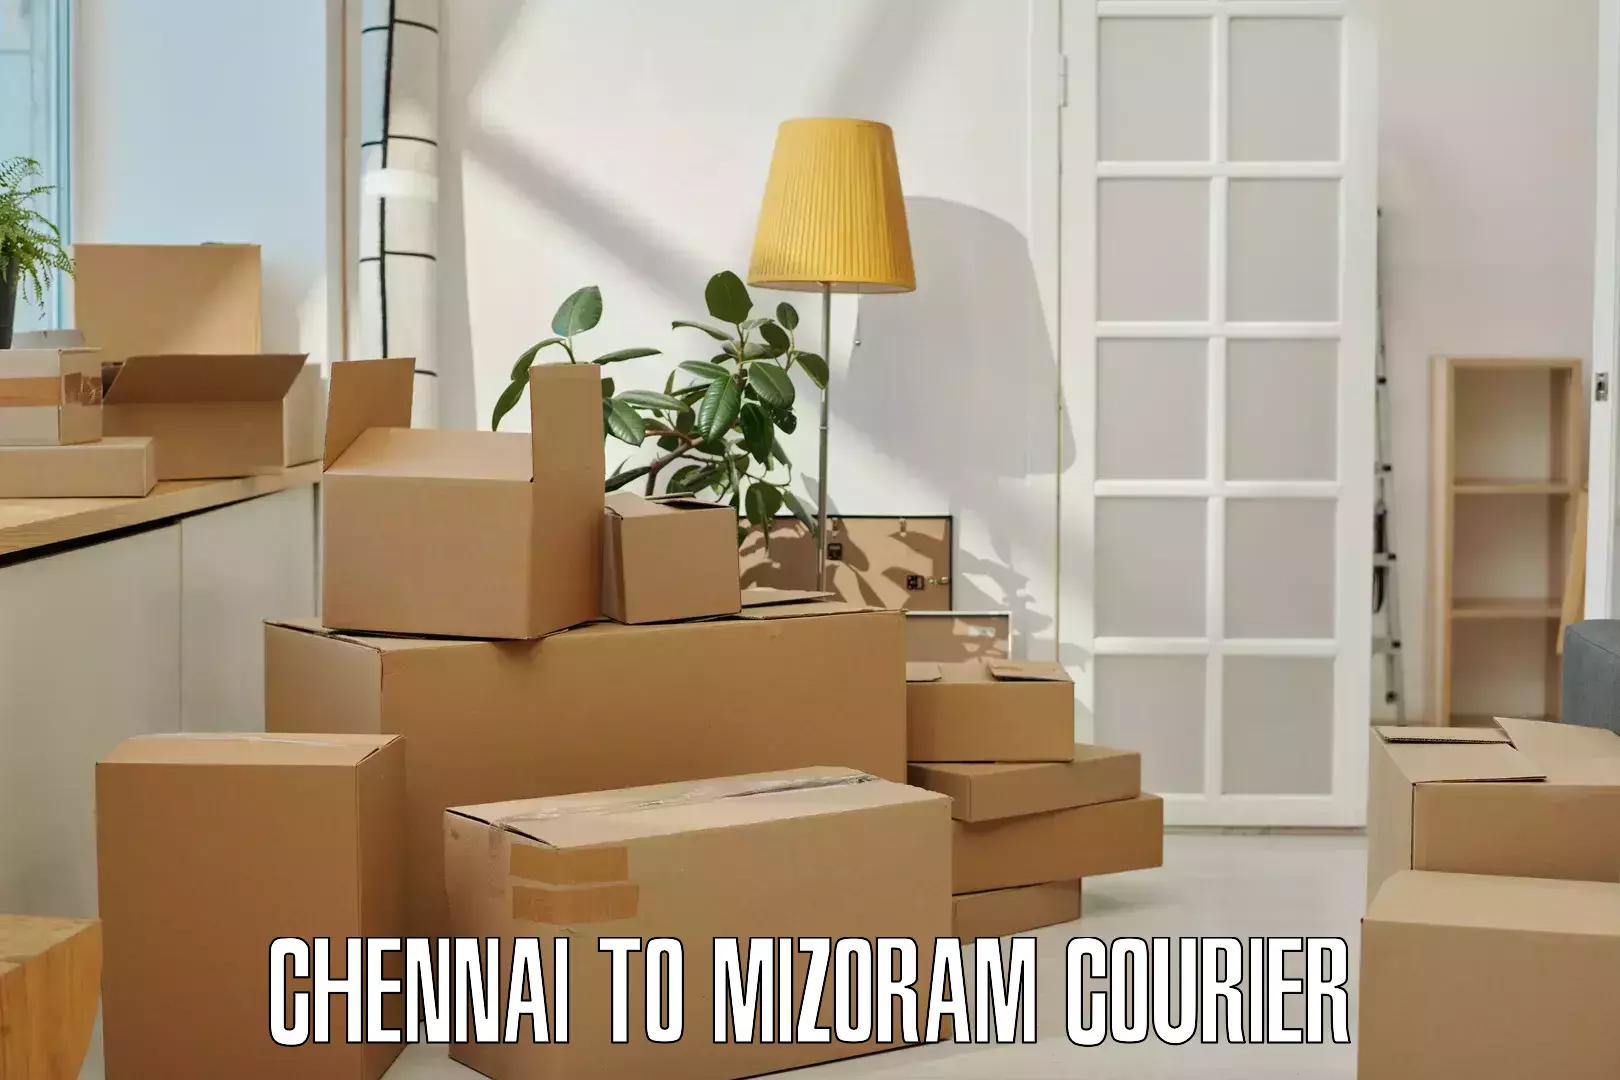 State-of-the-art courier technology Chennai to Siaha